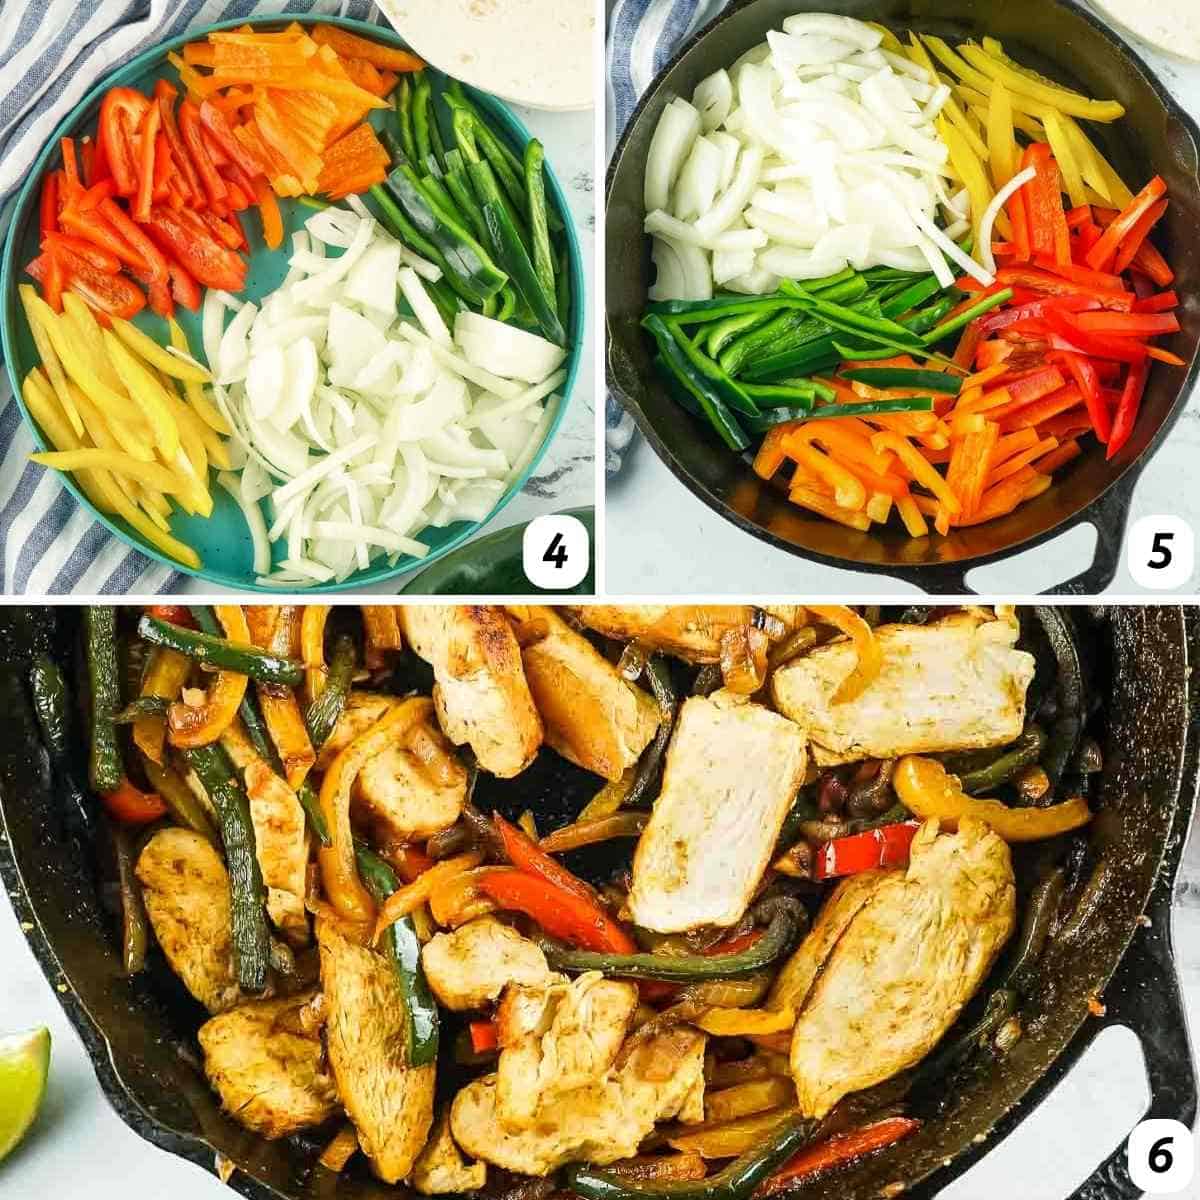 Three panel grid of process shots 4-6 - chopping vegetables, cooking separately in a skillet, and combining with chicken.